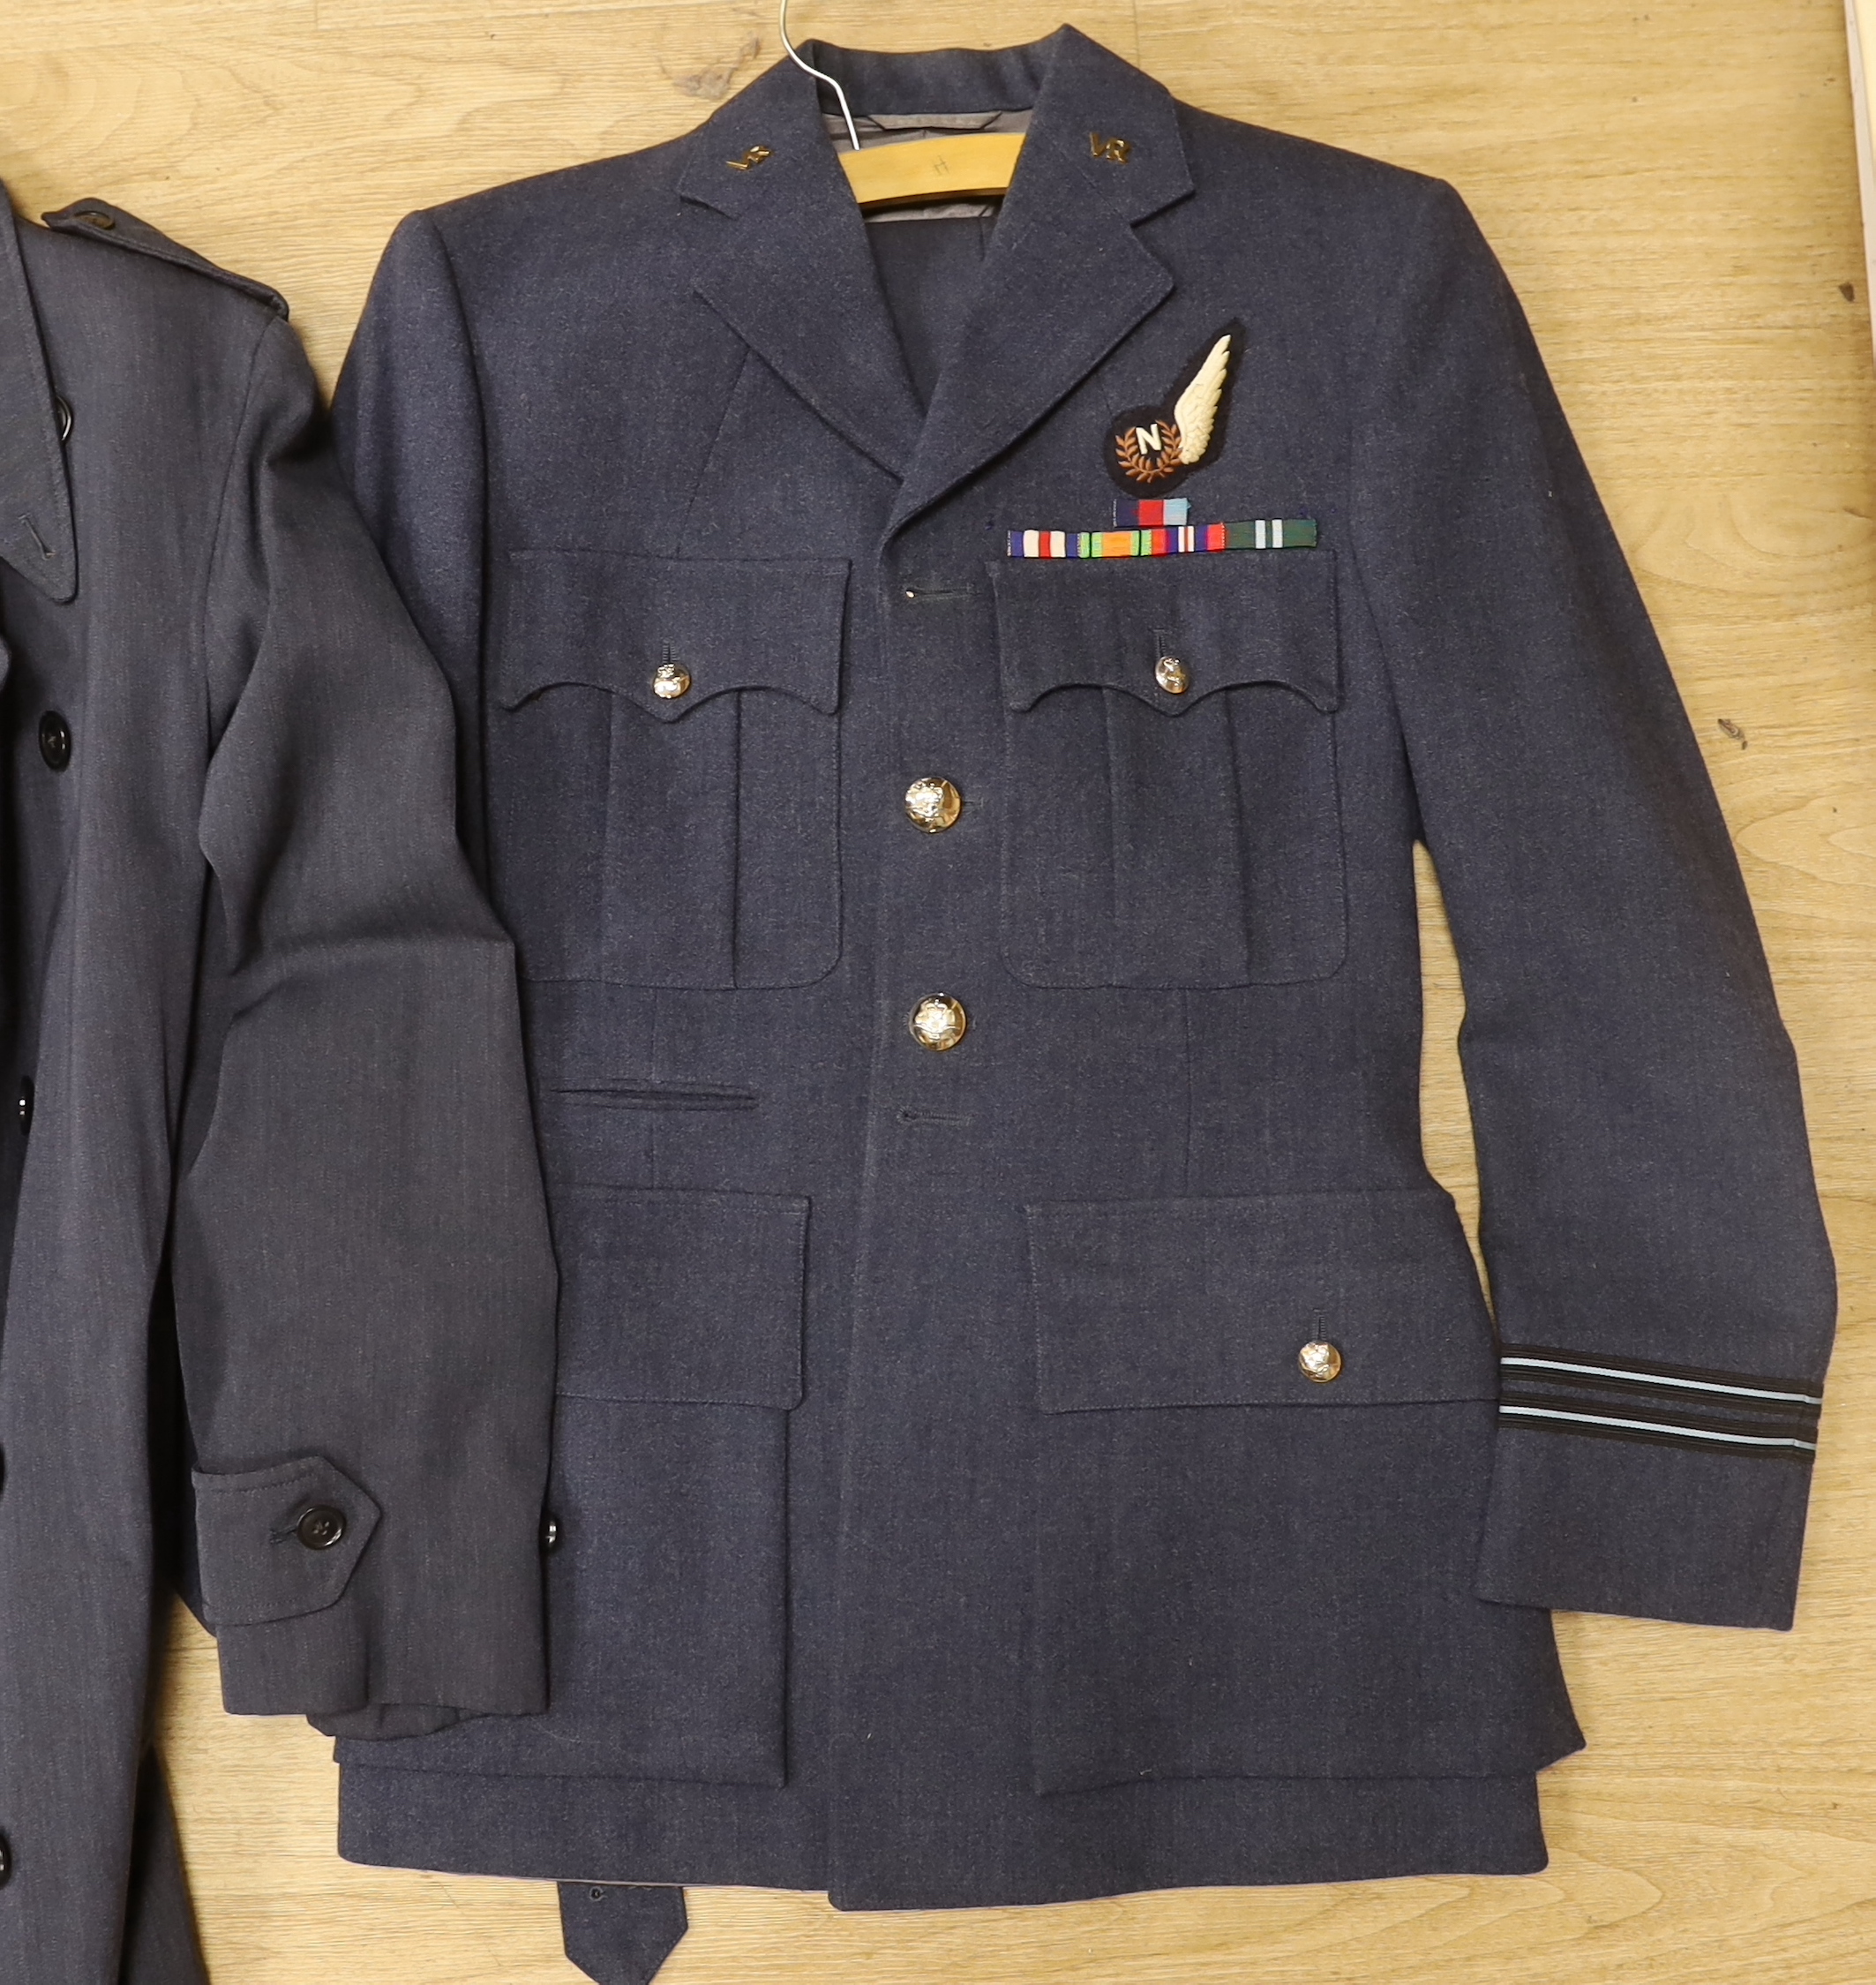 A collection of post-war RAF uniforms, comprising; two caps, double-breasted overcoat, dress uniform of jacket, trousers and gloves, two sets of jacket and trousers with ribbons for WWII awards, plus a pair of navigator’